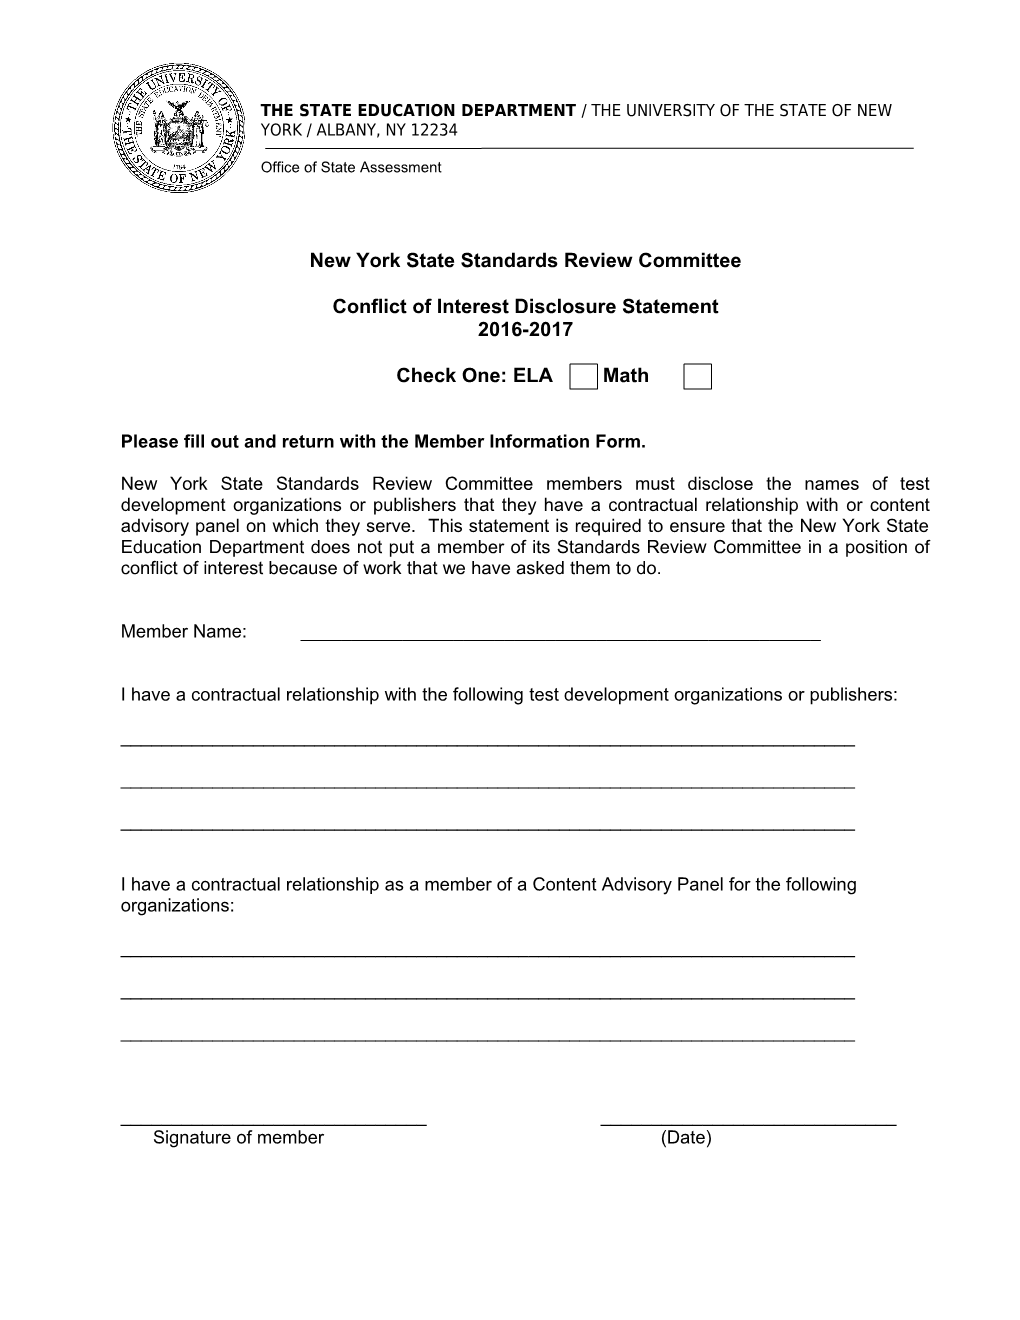 New York State Technical Advisory Group